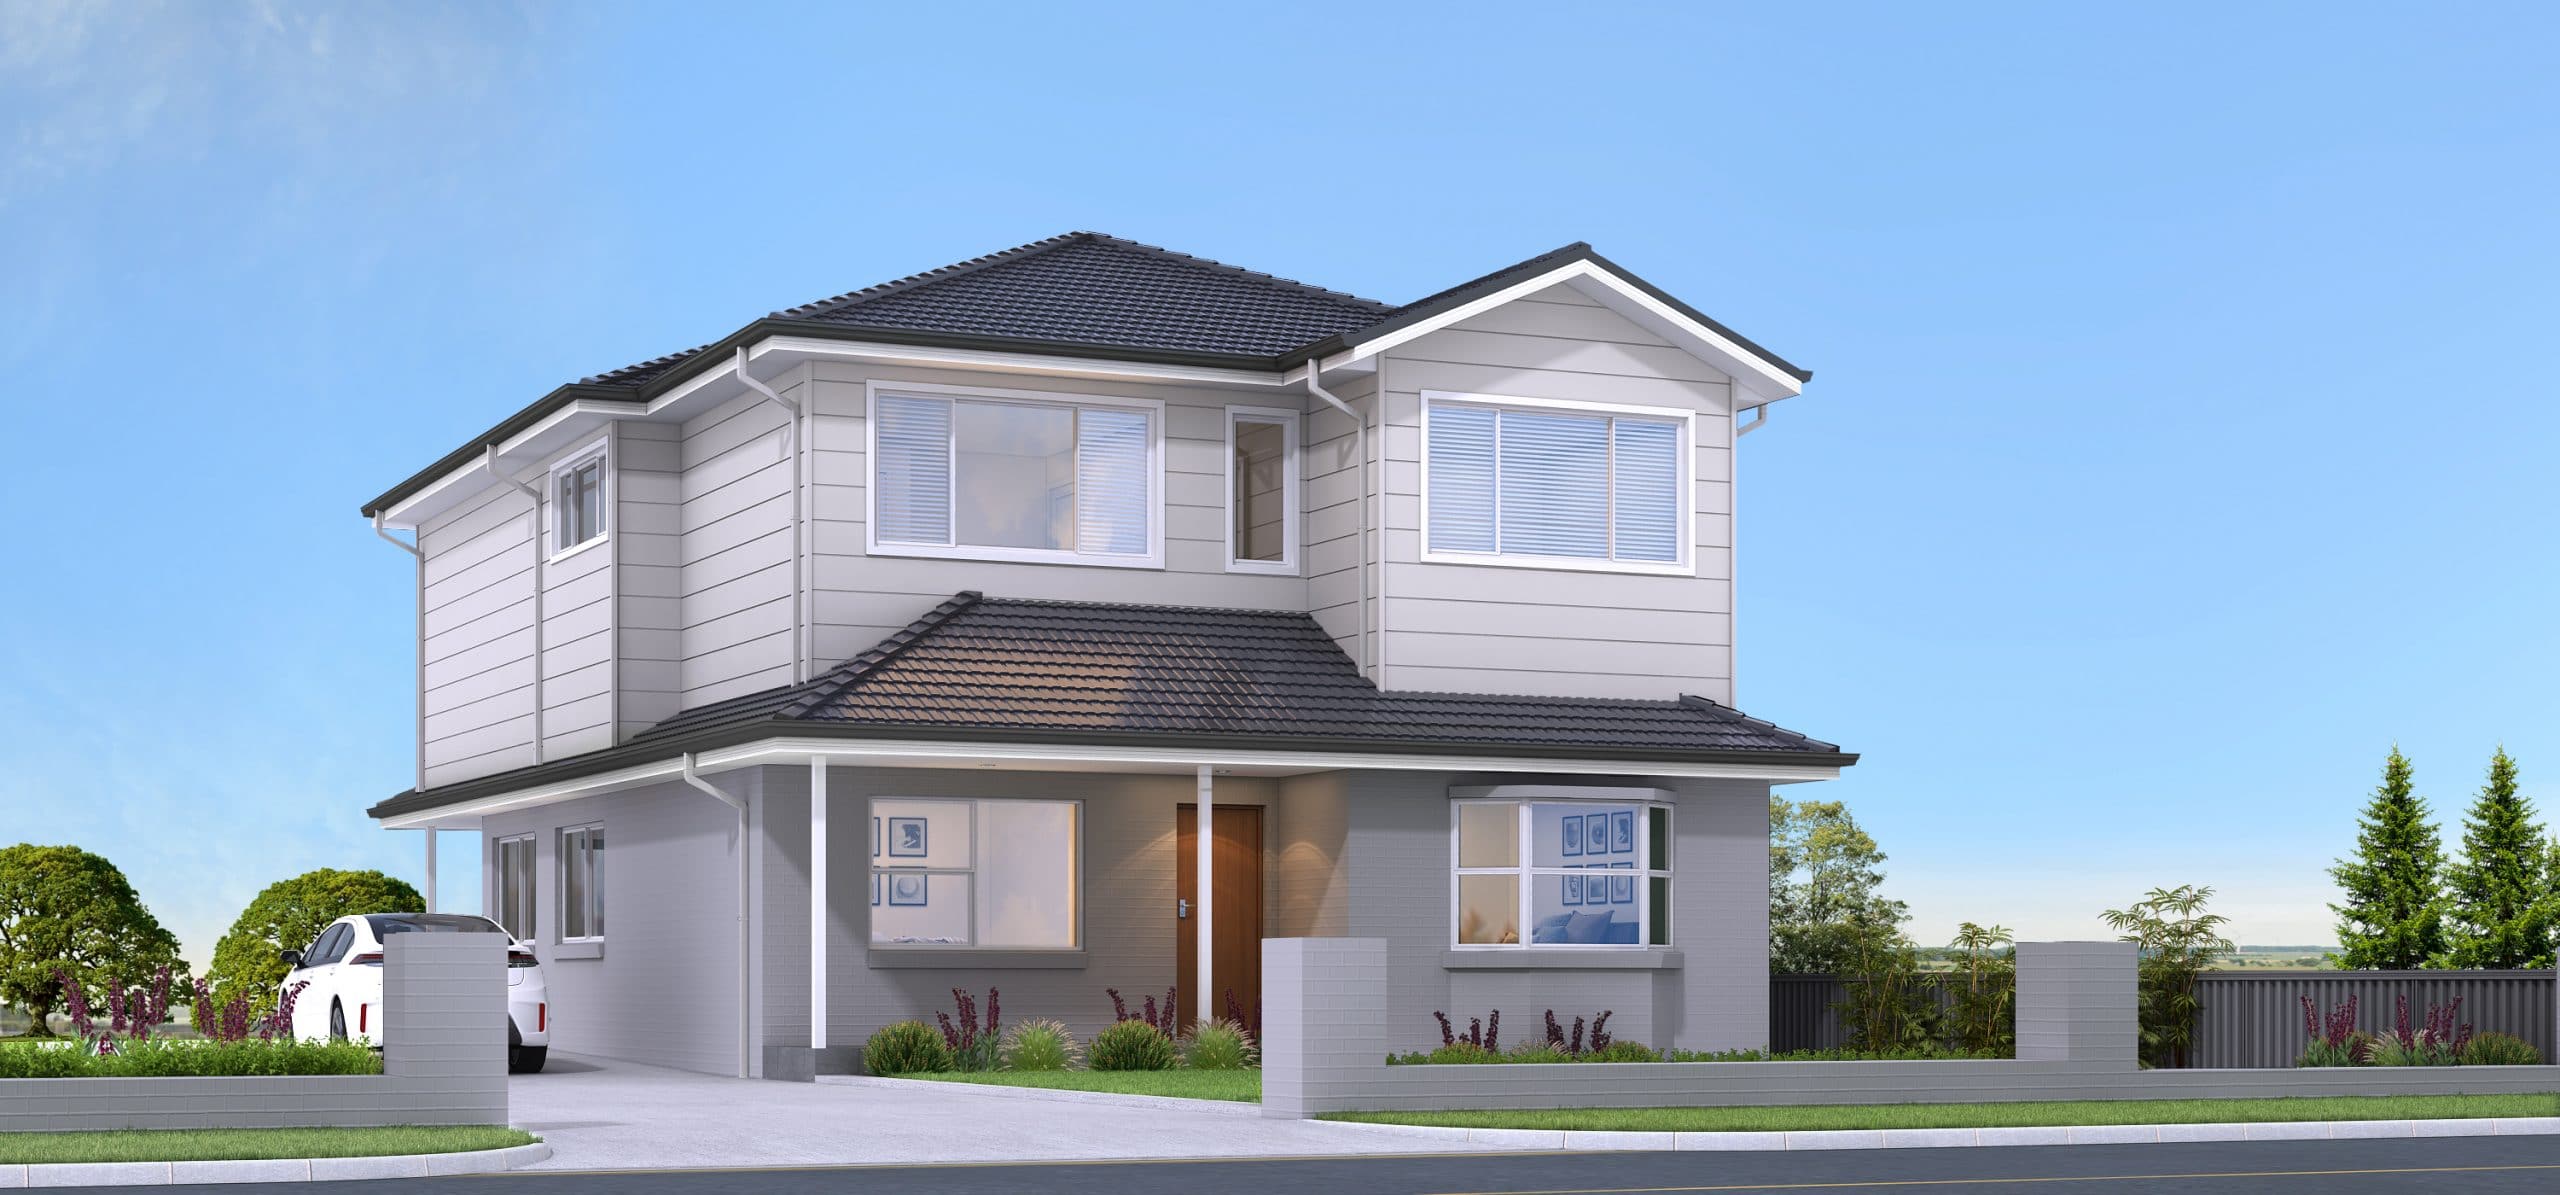 Render of a first floor addition to a home in Earlwood